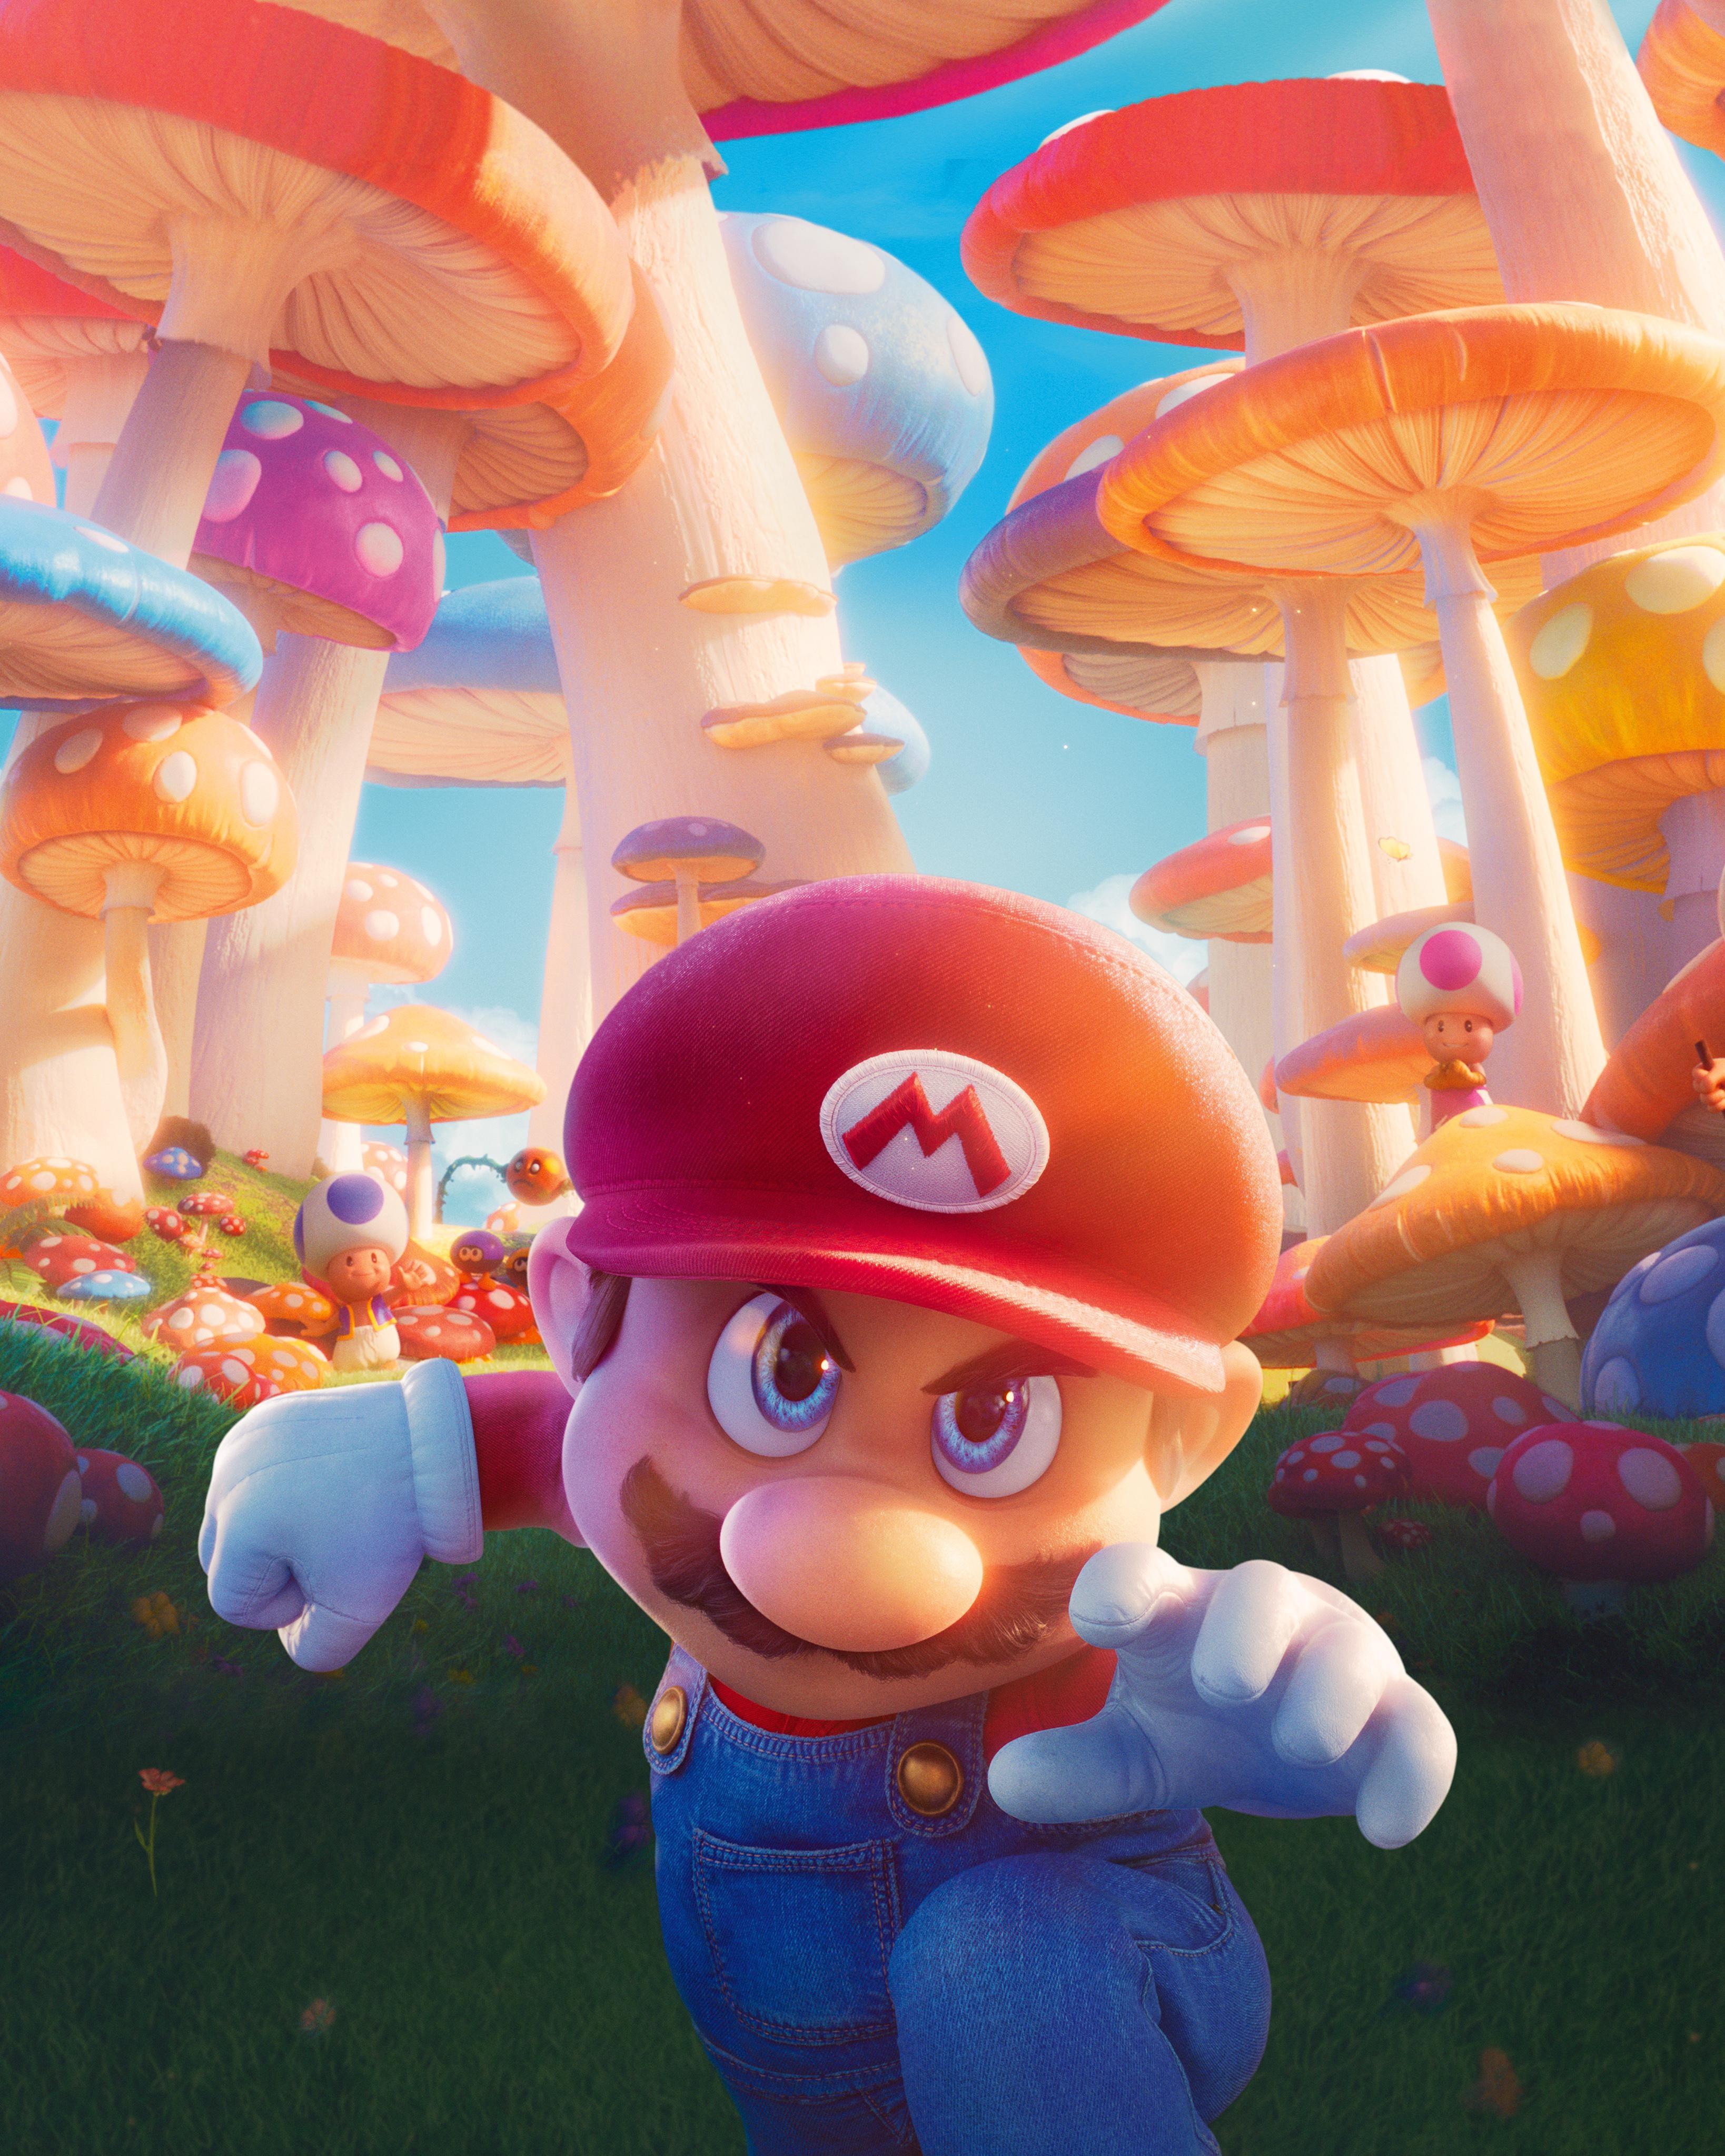 🔥 Free Download The Super Mario Bros Movie Official 4k Uhd 3276x4096 R